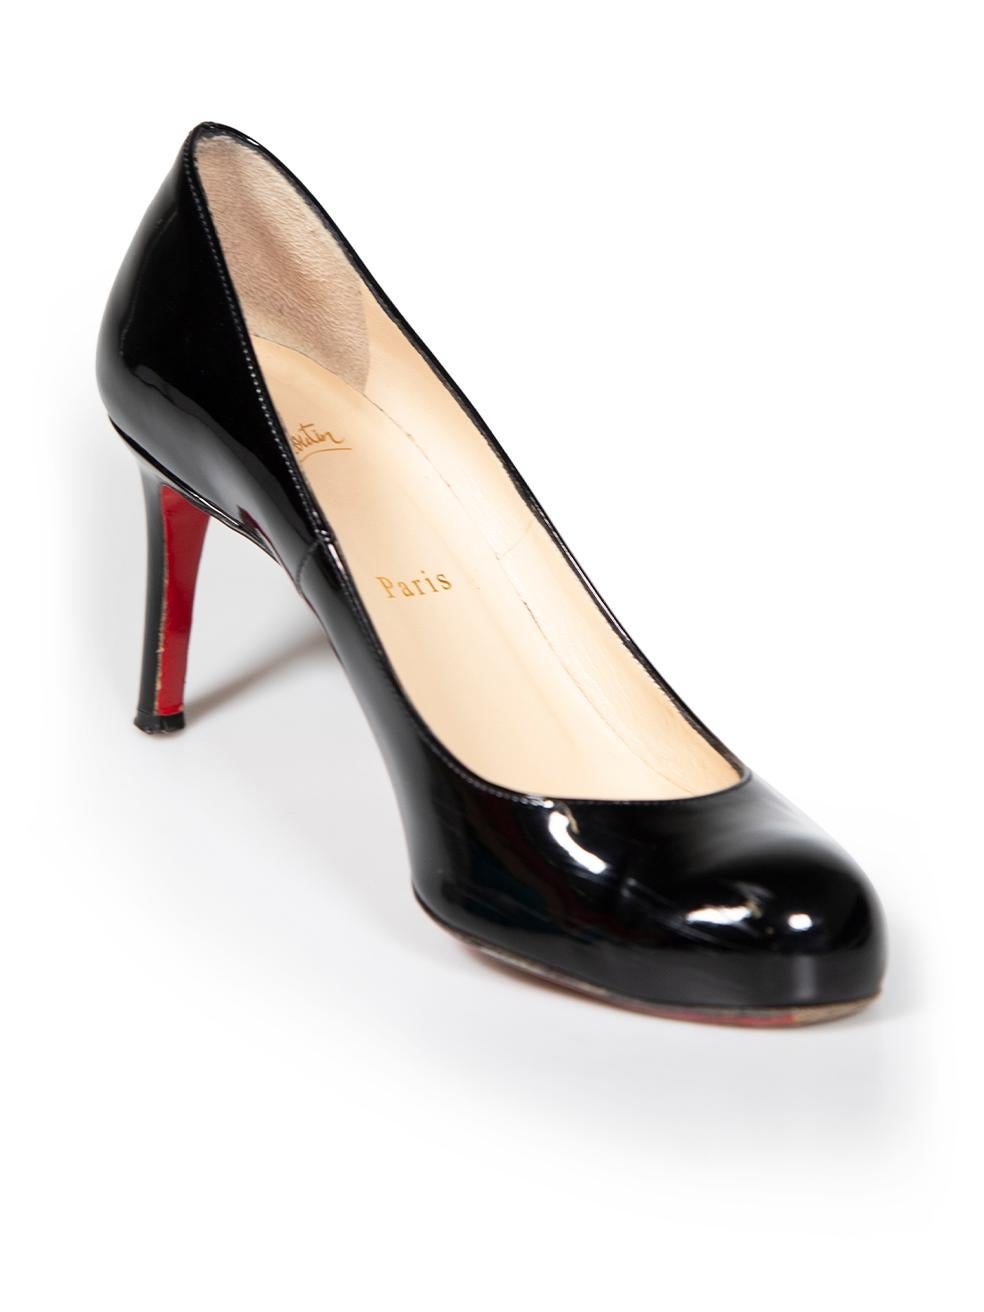 CONDITION is Good. Minor wear to pumps is evident. Light scratches to the sides and some indentation to the heel, with general wear to the soles on this used Christian Louboutin designer resale item. These shoes come with original box and dust bag.
